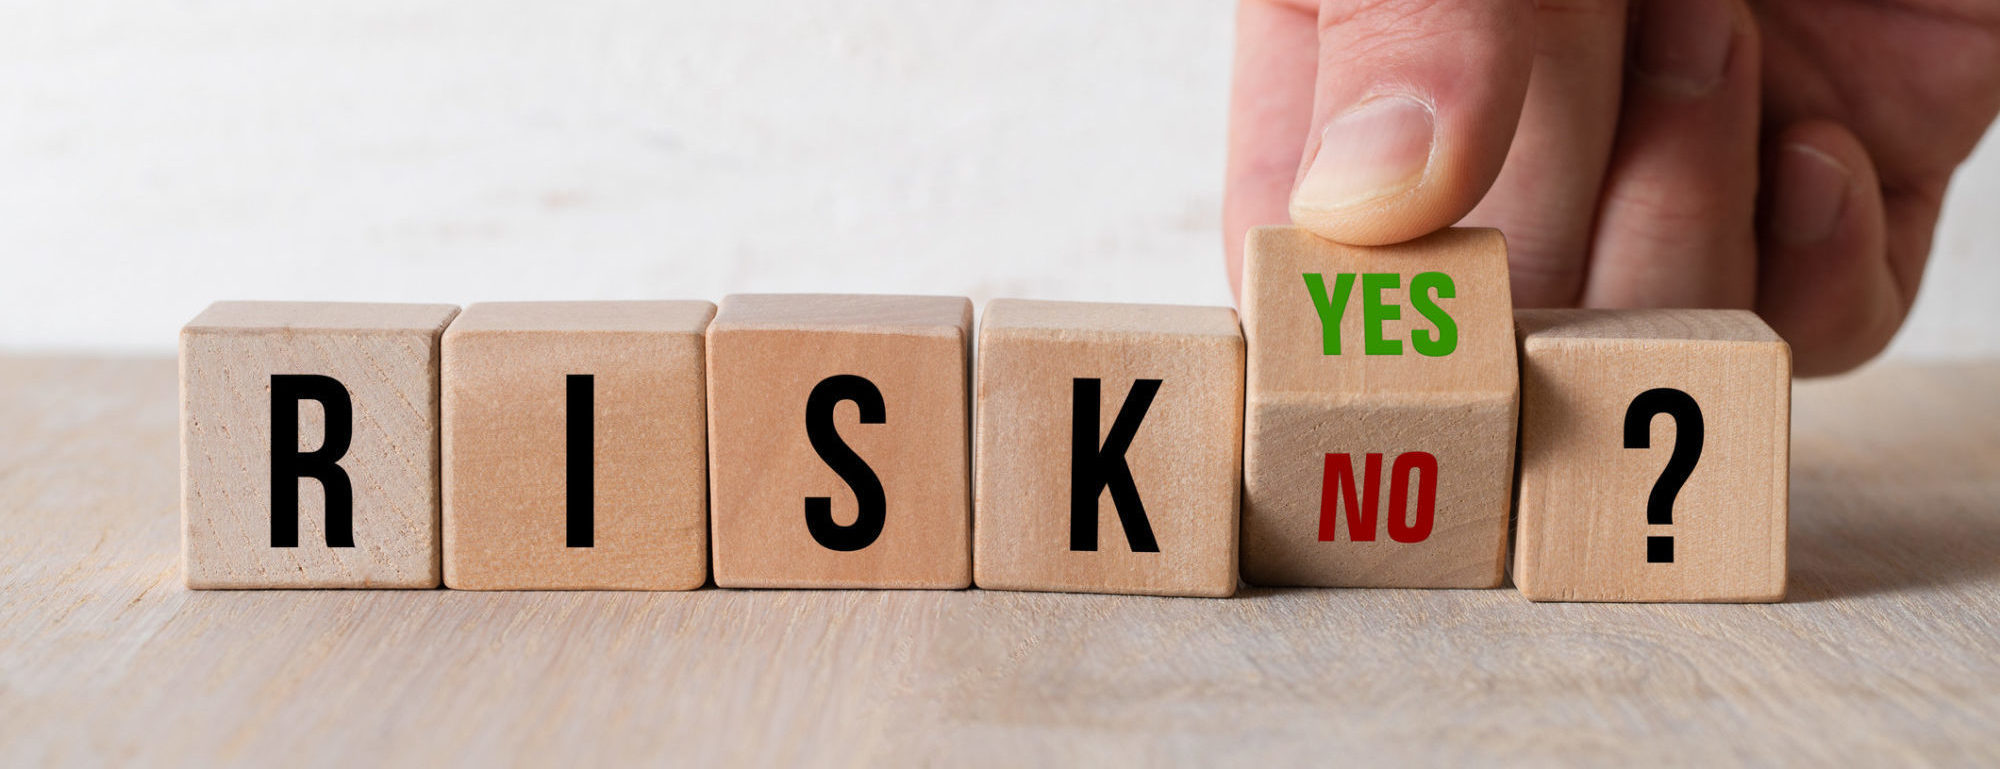 A hand turns a wooden cube with YES or NO written on it as an answer to the cubes before it that spell out RISK.